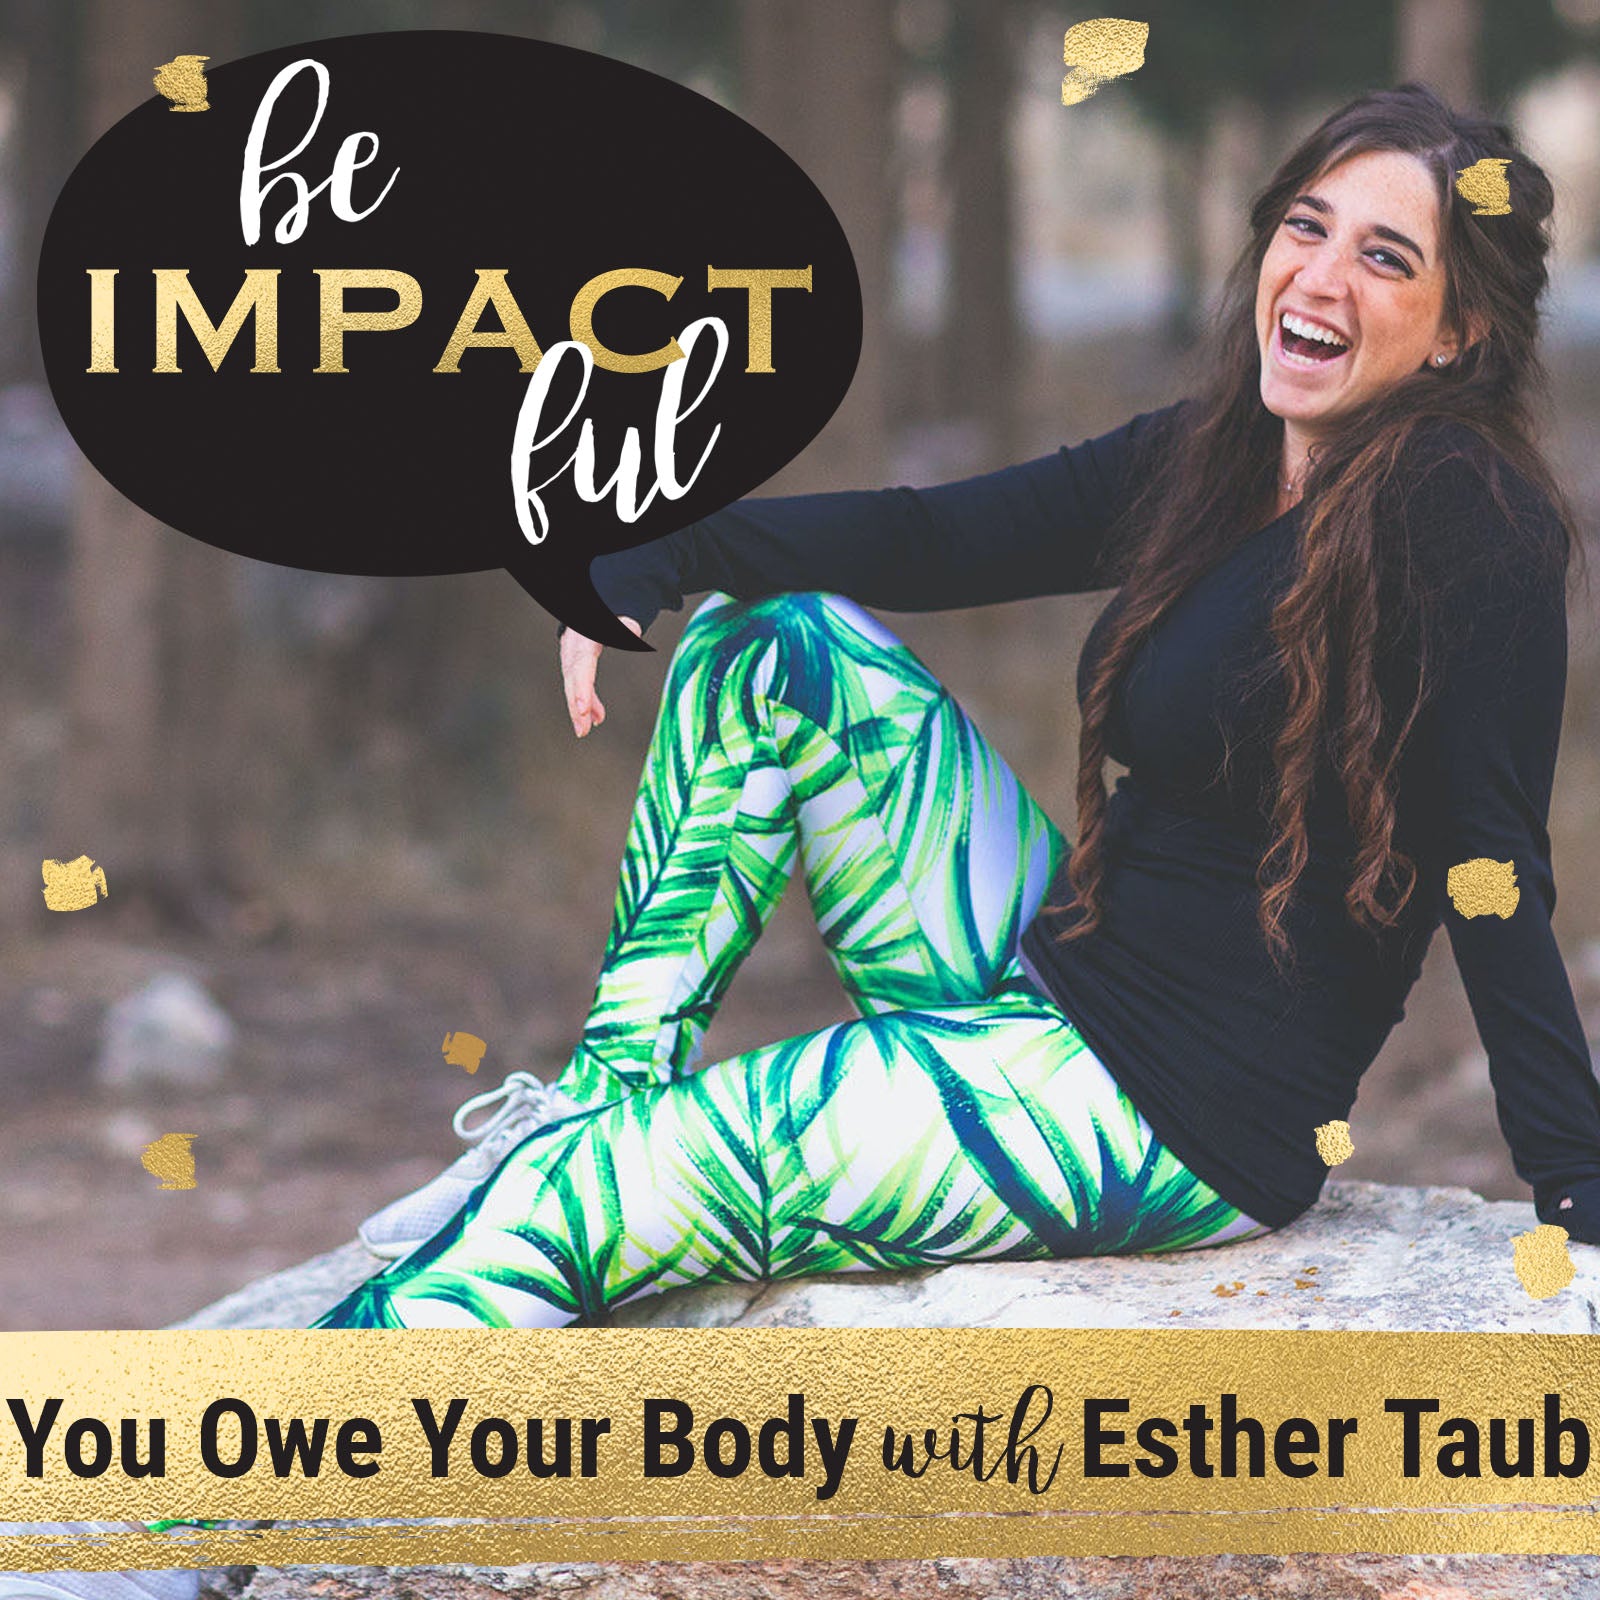 You Owe Your Body with Esther Taub